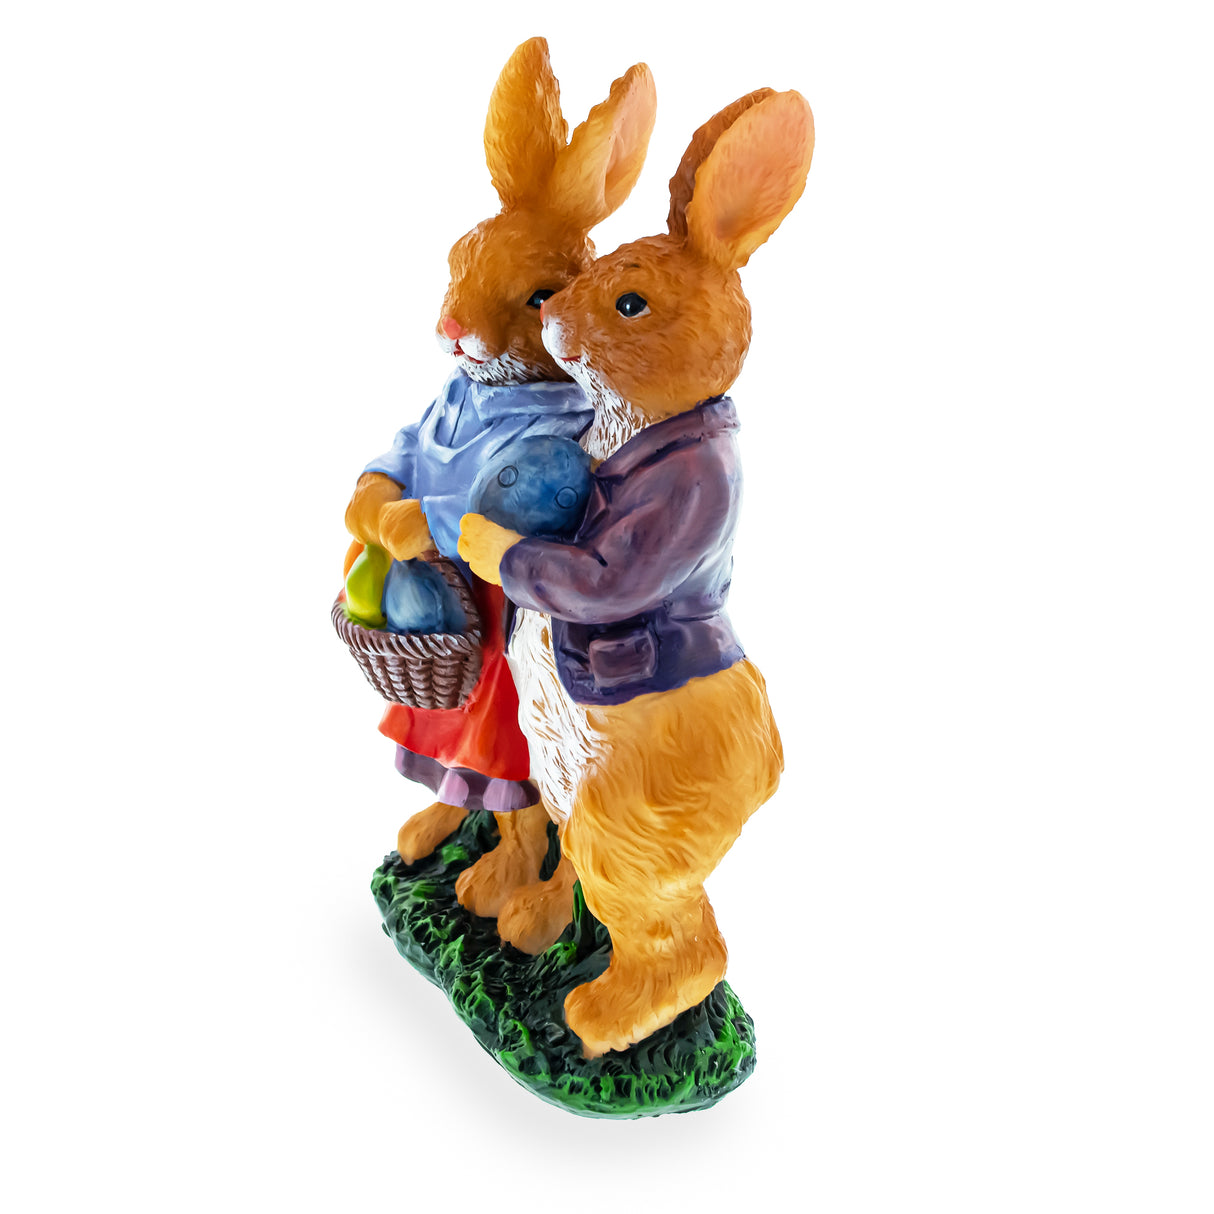 Loving Bunny Duo with Festive Easter Basket Figurine ,dimensions in inches: 6.2 x 2 x 3.7